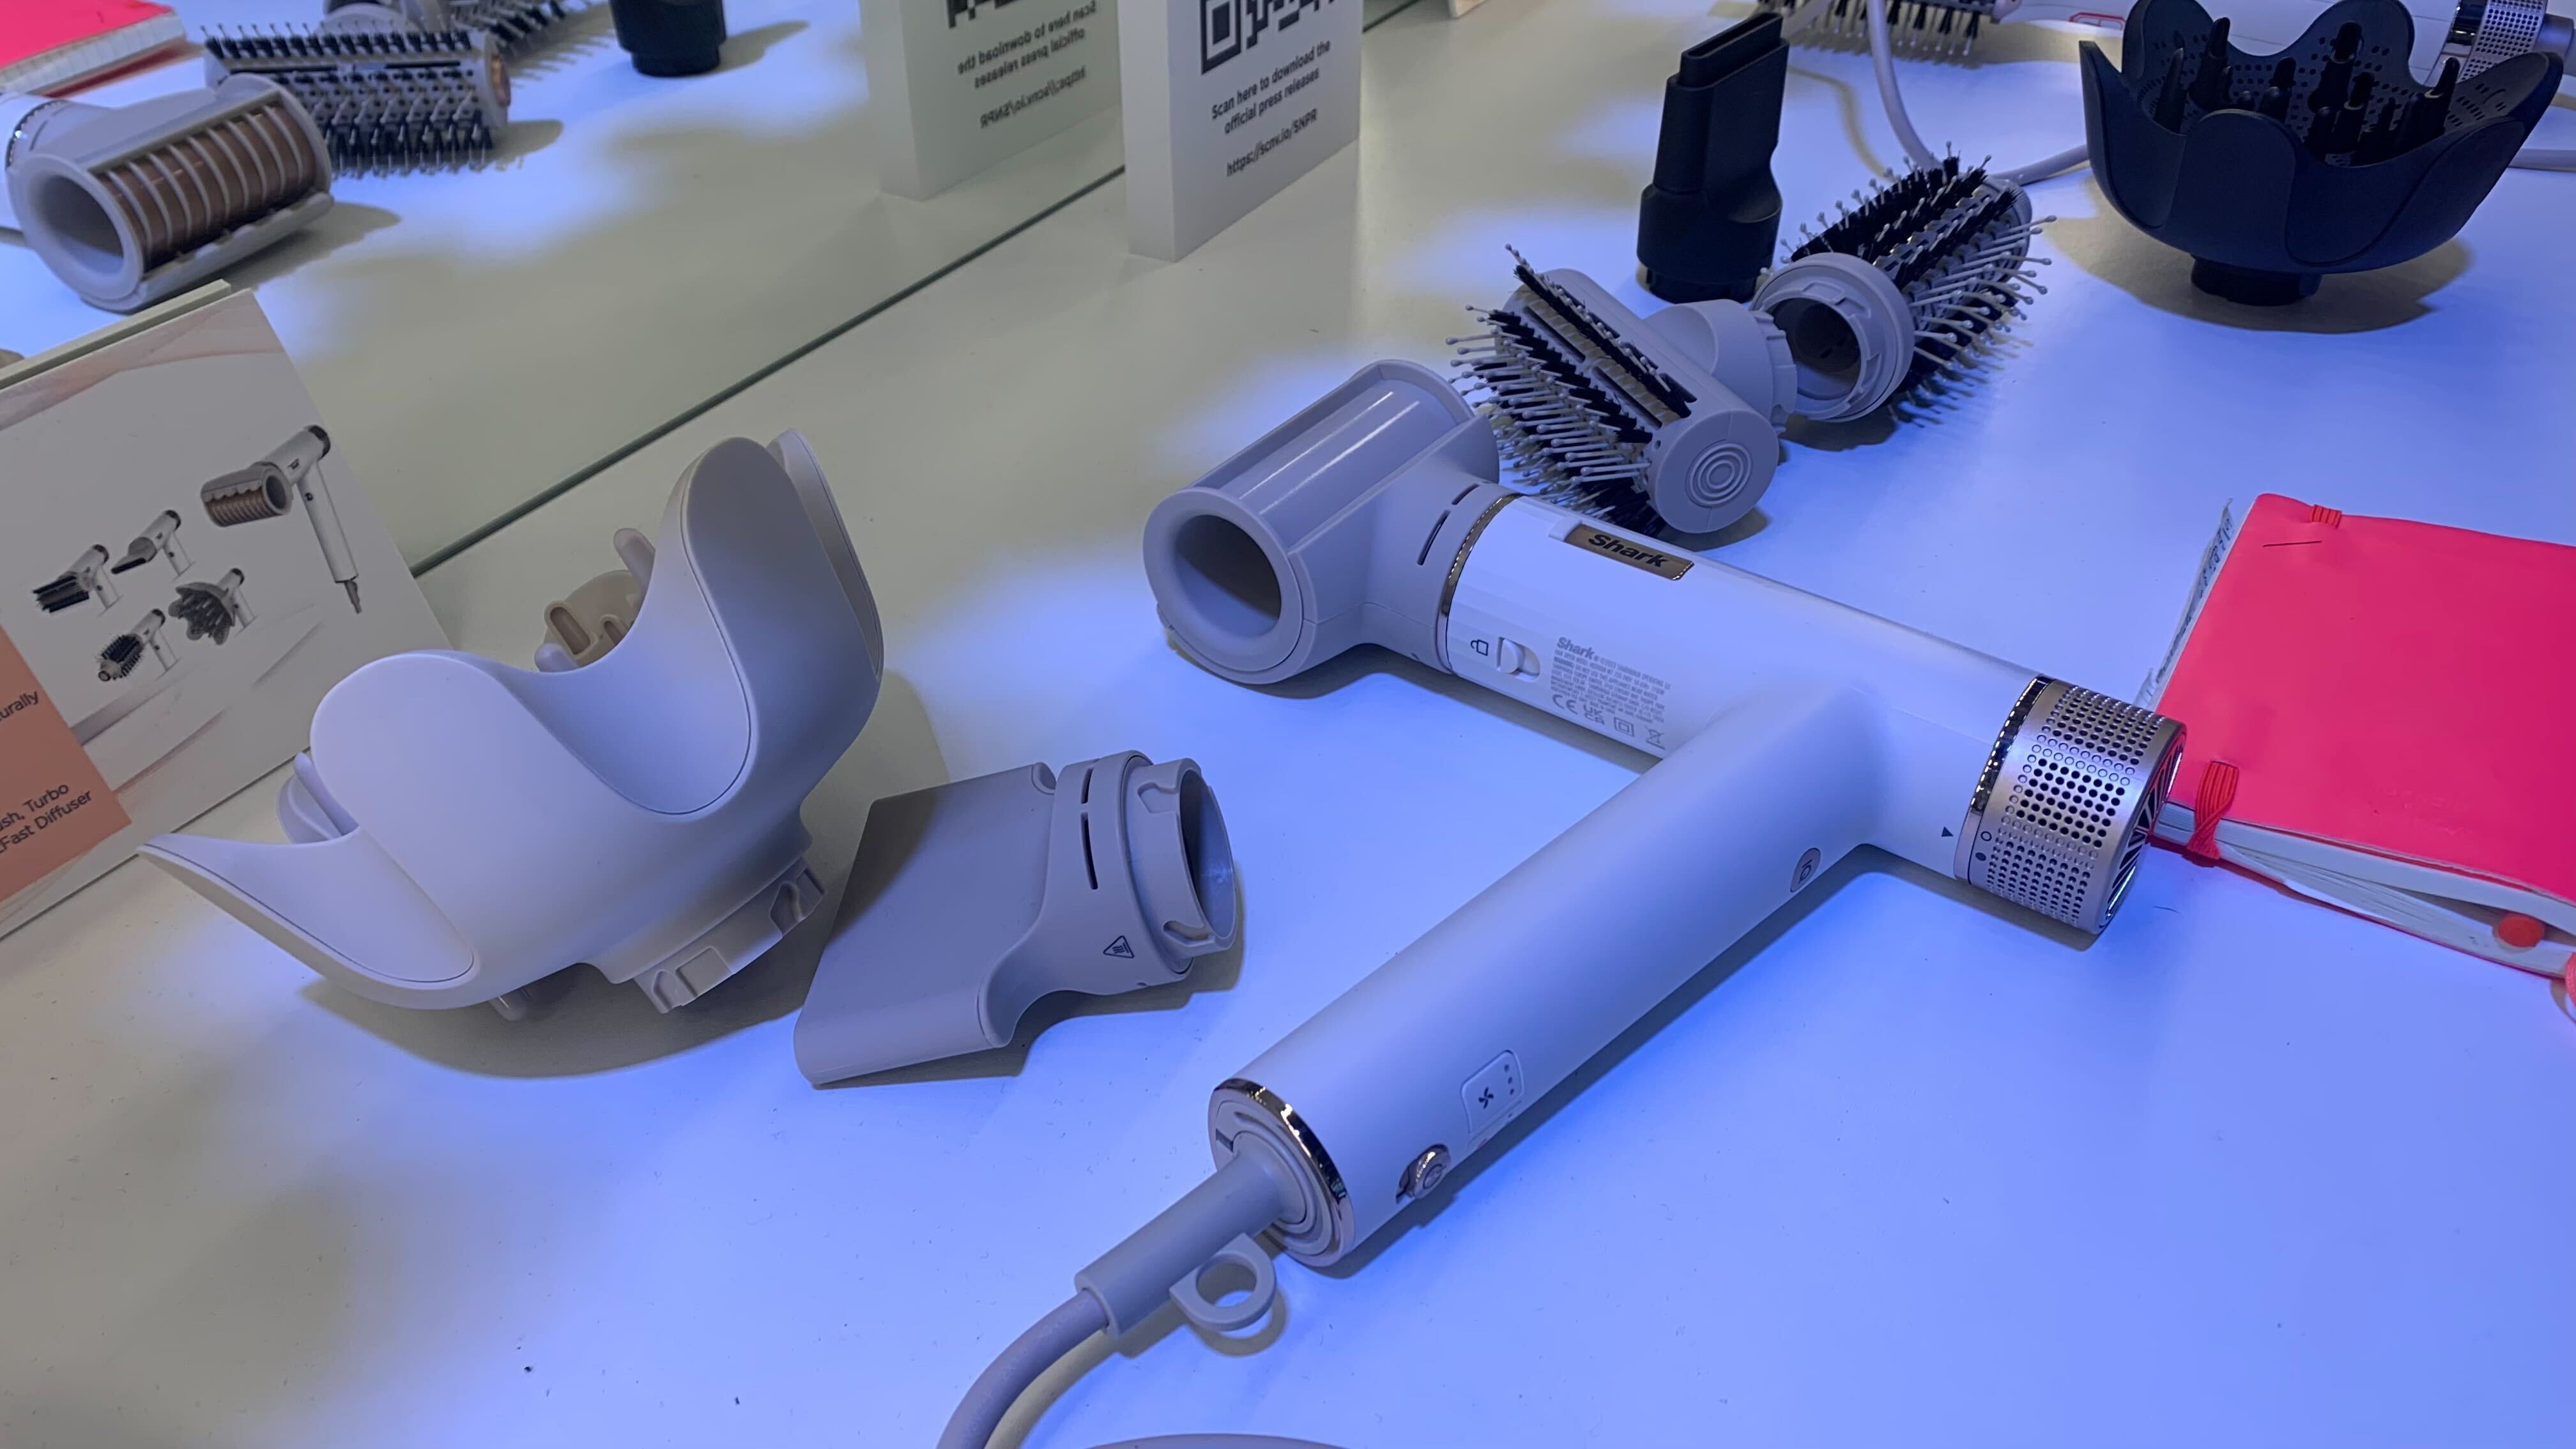 A SharkNinja hair dryer on a table at the IFA trade show